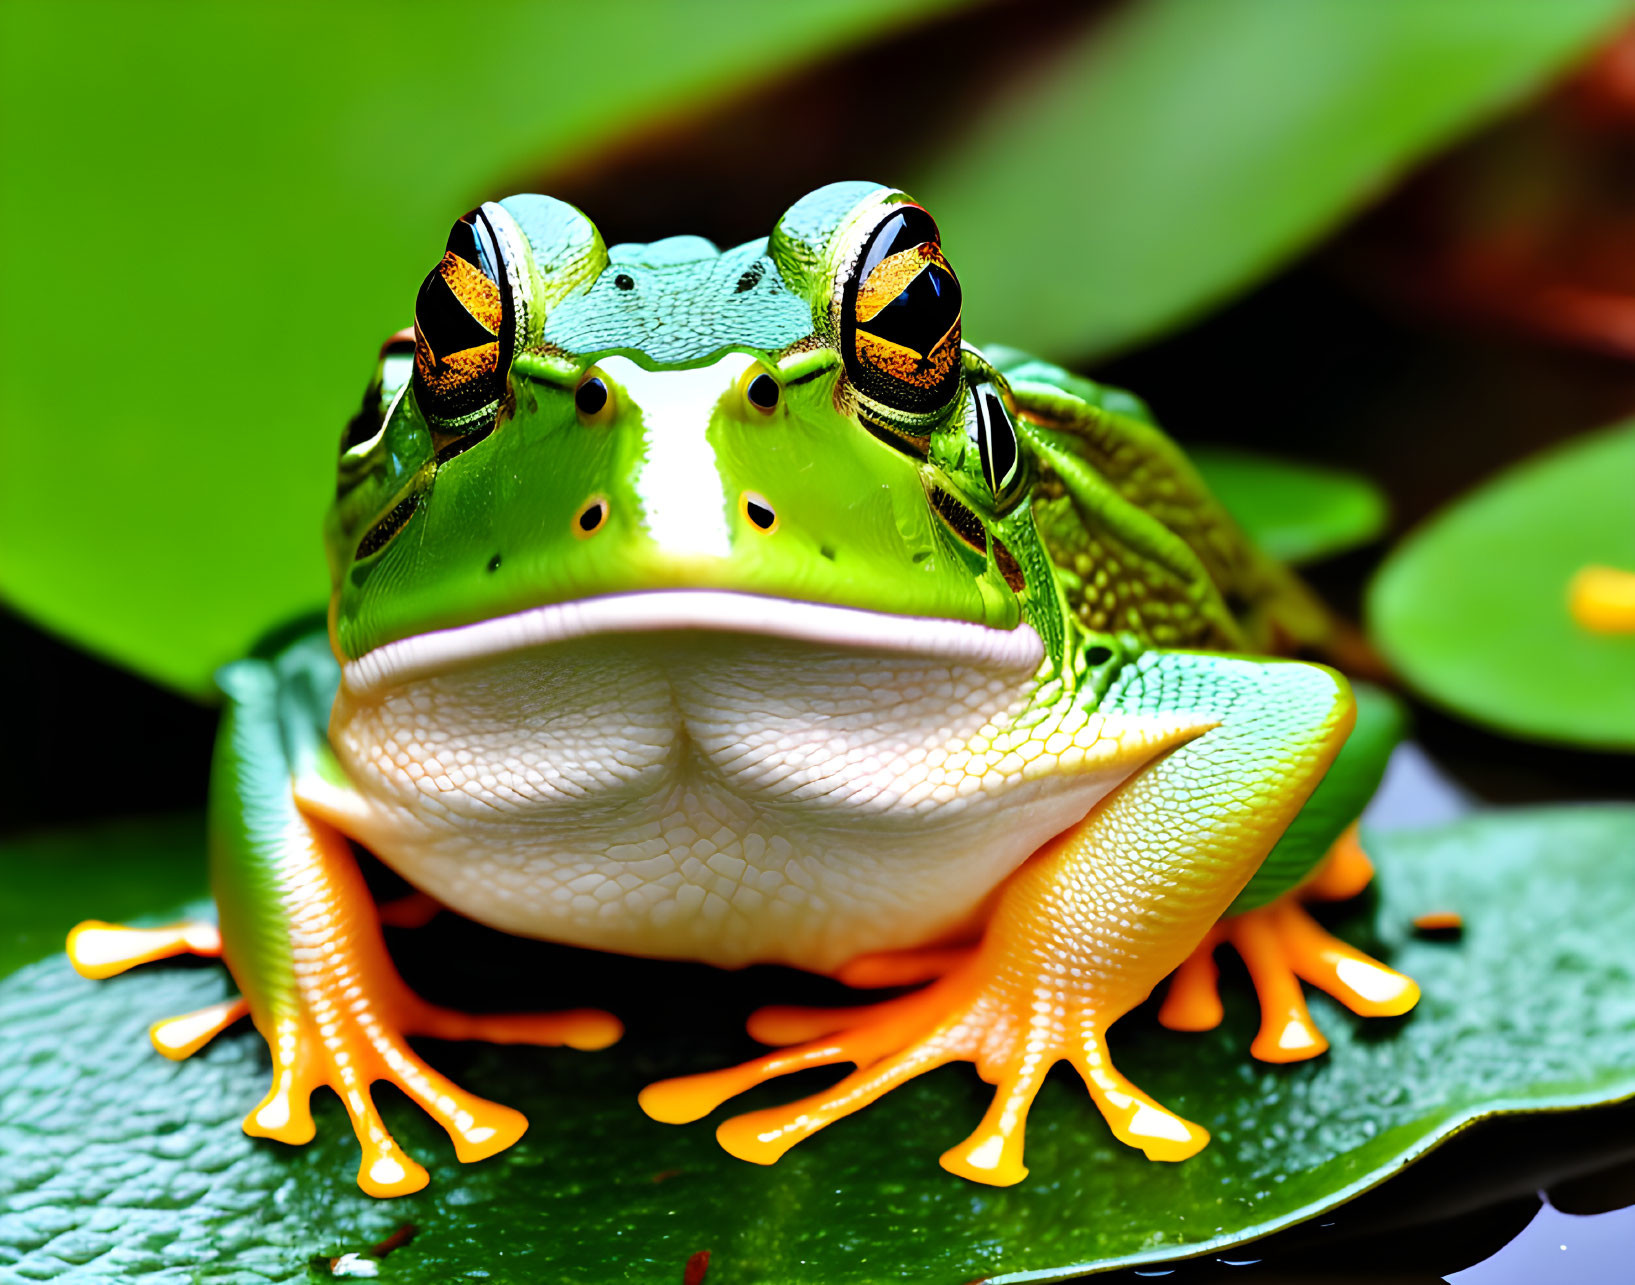 Colorful Green Frog with Yellow-Orange Feet on Leaf